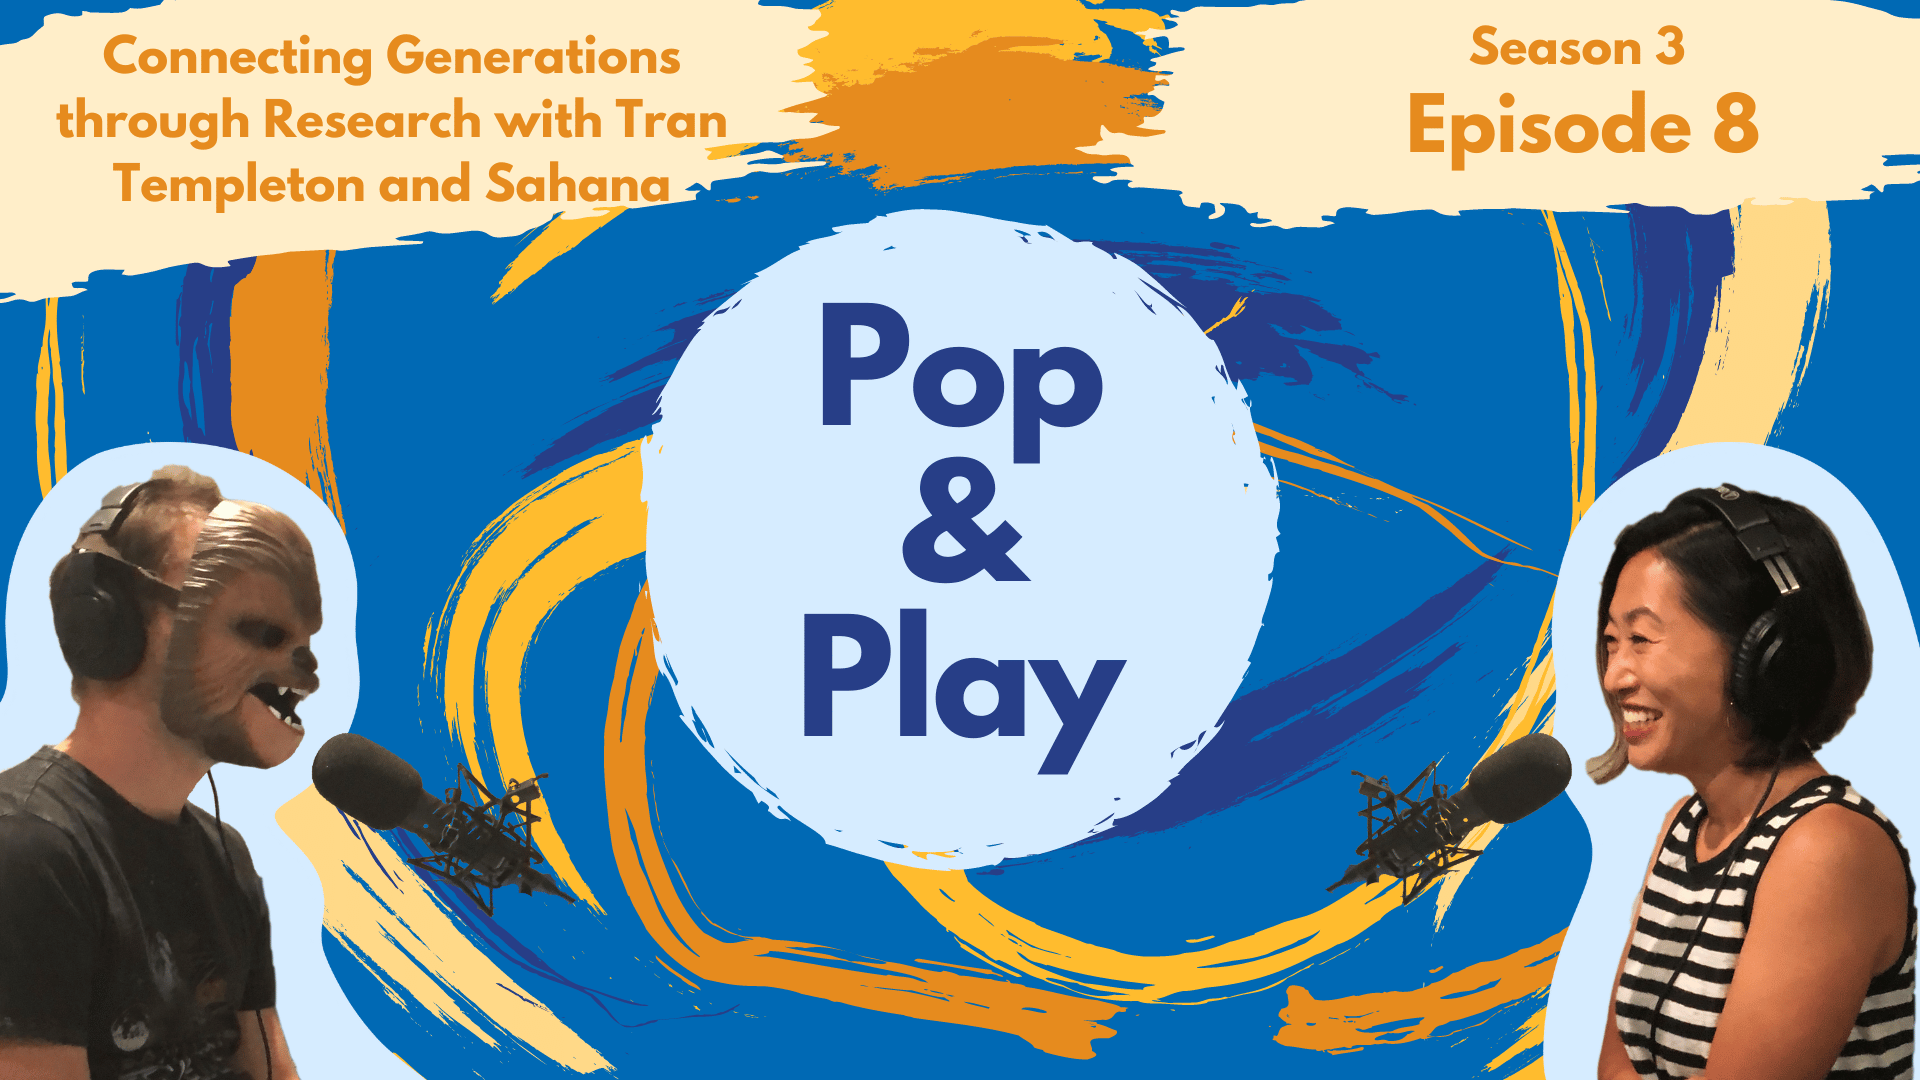 Pop and Play Season 3 Episode 8 image with logo